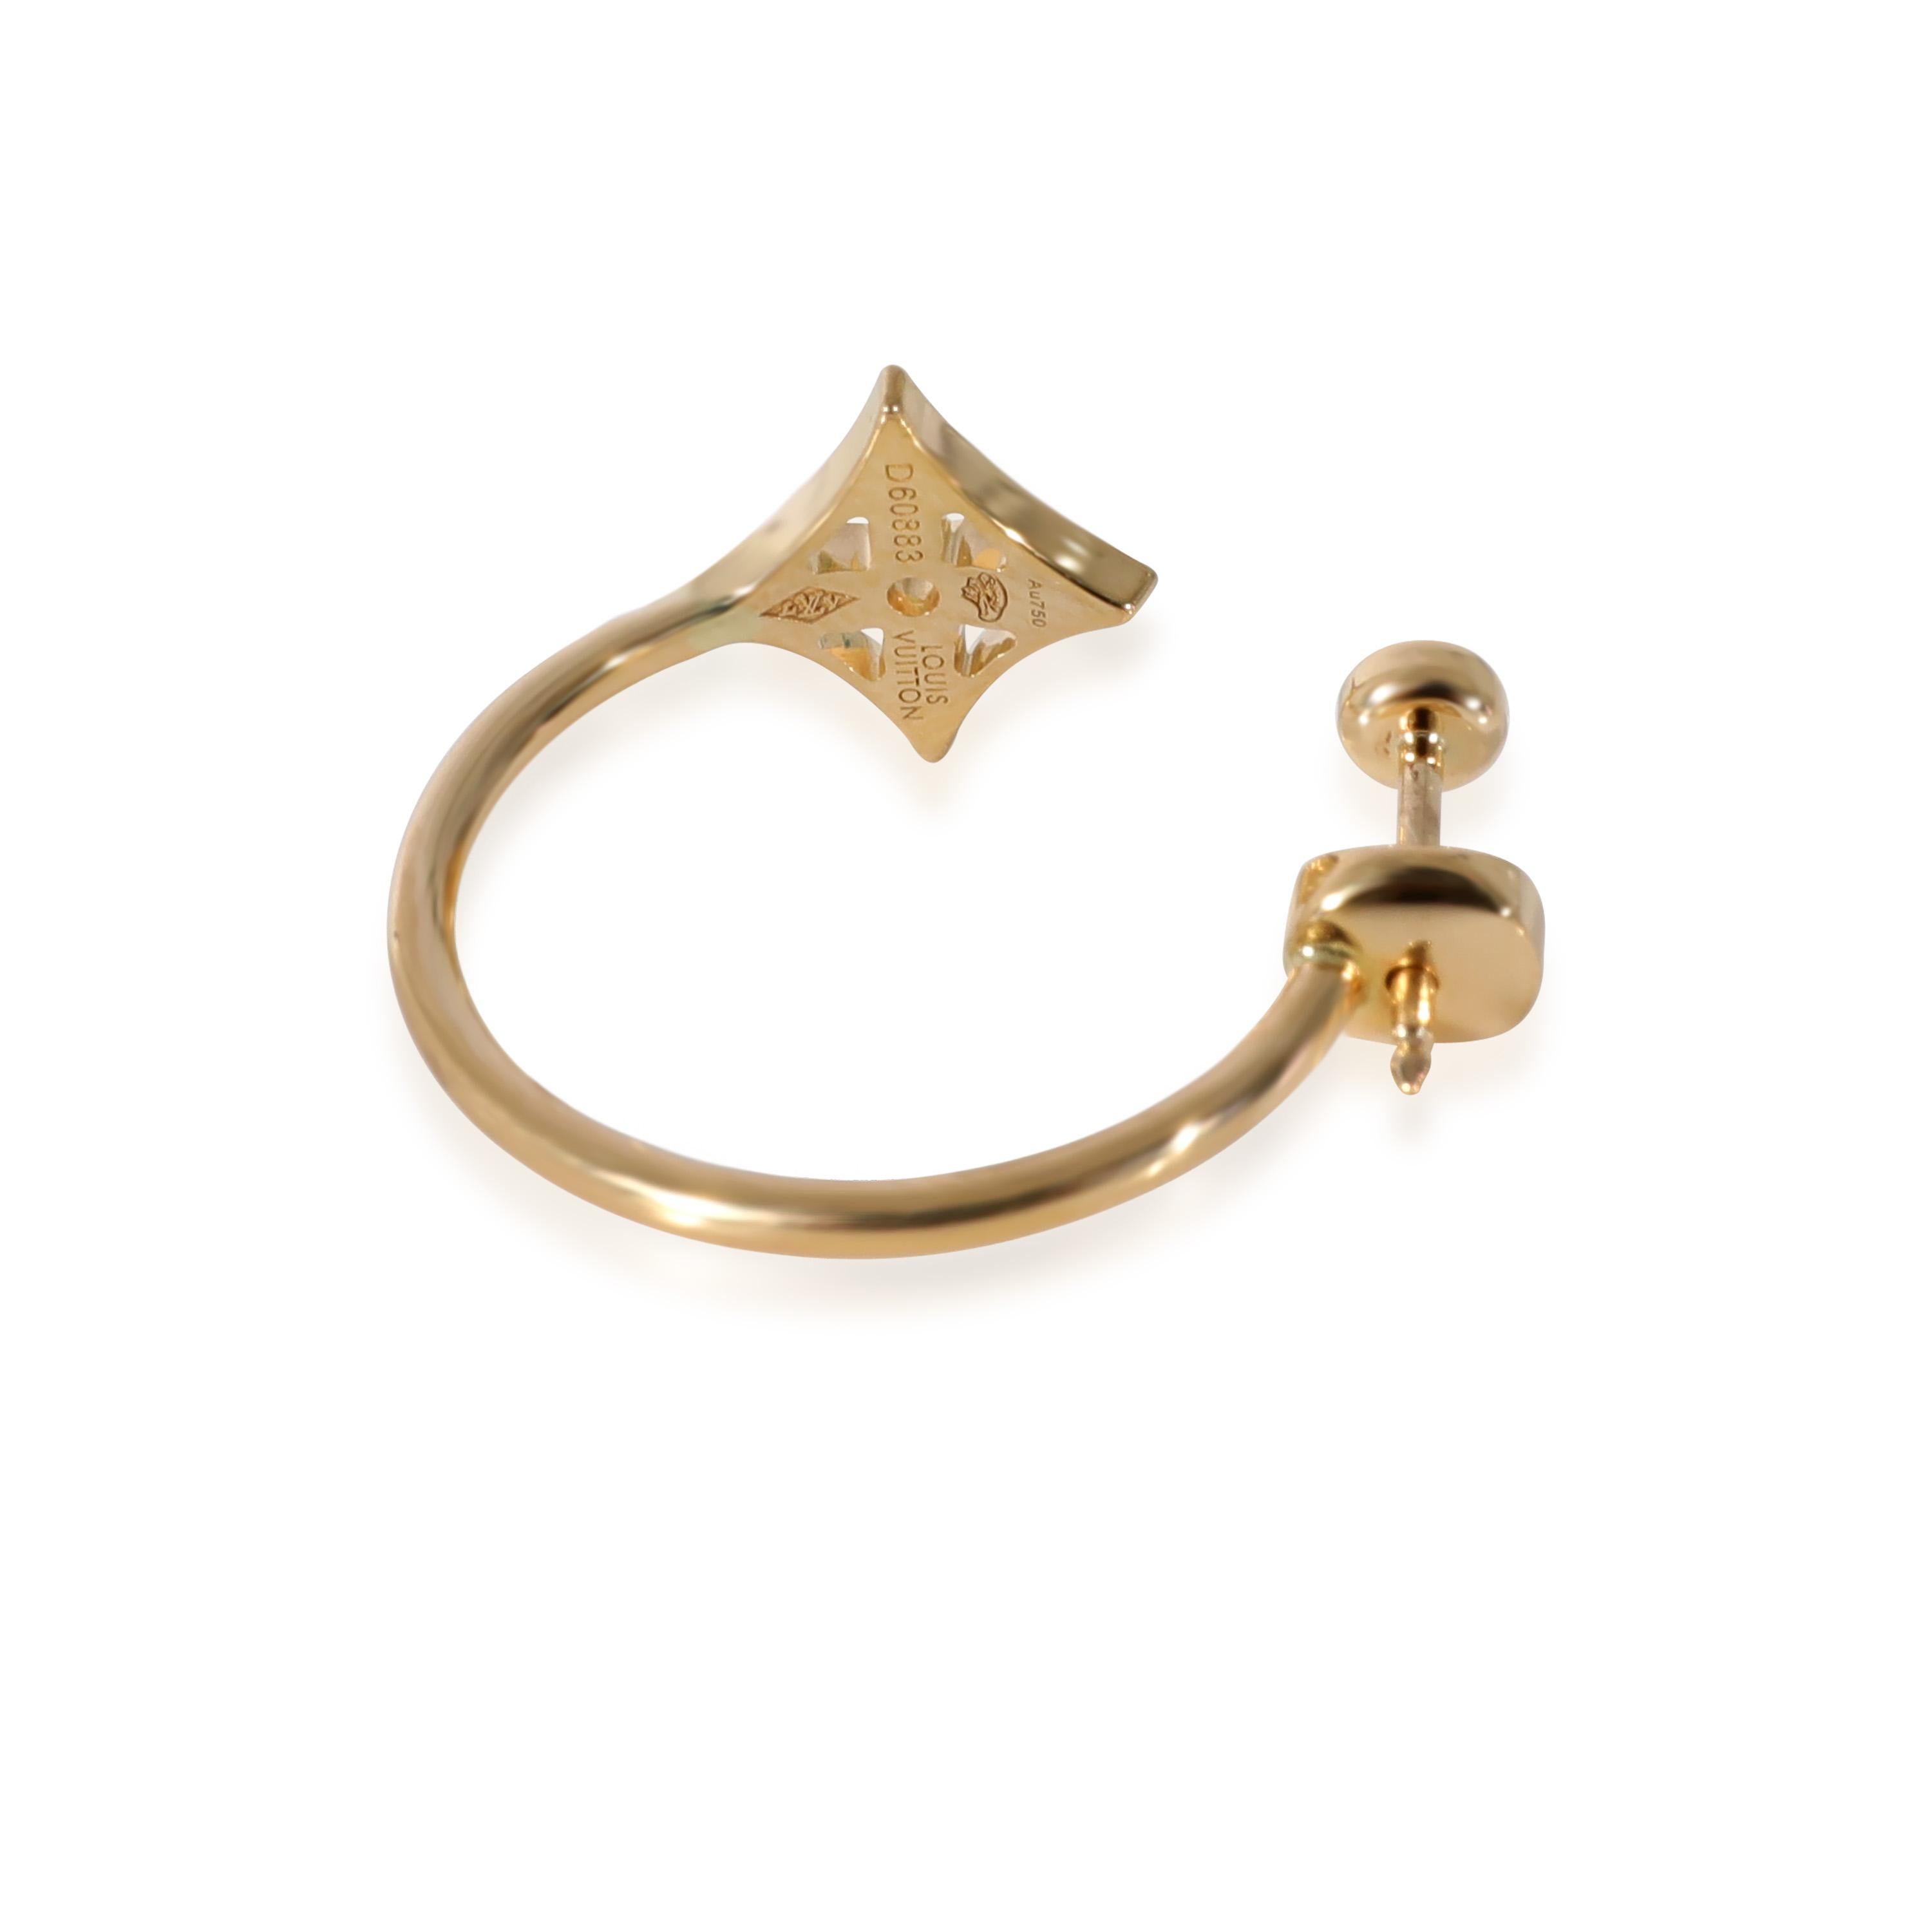 Louis Vuitton Idylle Blossom Diamond Earring in 18k Yellow Gold 0.04 CTW

PRIMARY DETAILS
SKU: 129079
Listing Title: Louis Vuitton Idylle Blossom Diamond Earring in 18k Yellow Gold 0.04 CTW
Condition Description: Retails for 1700 USD. In excellent